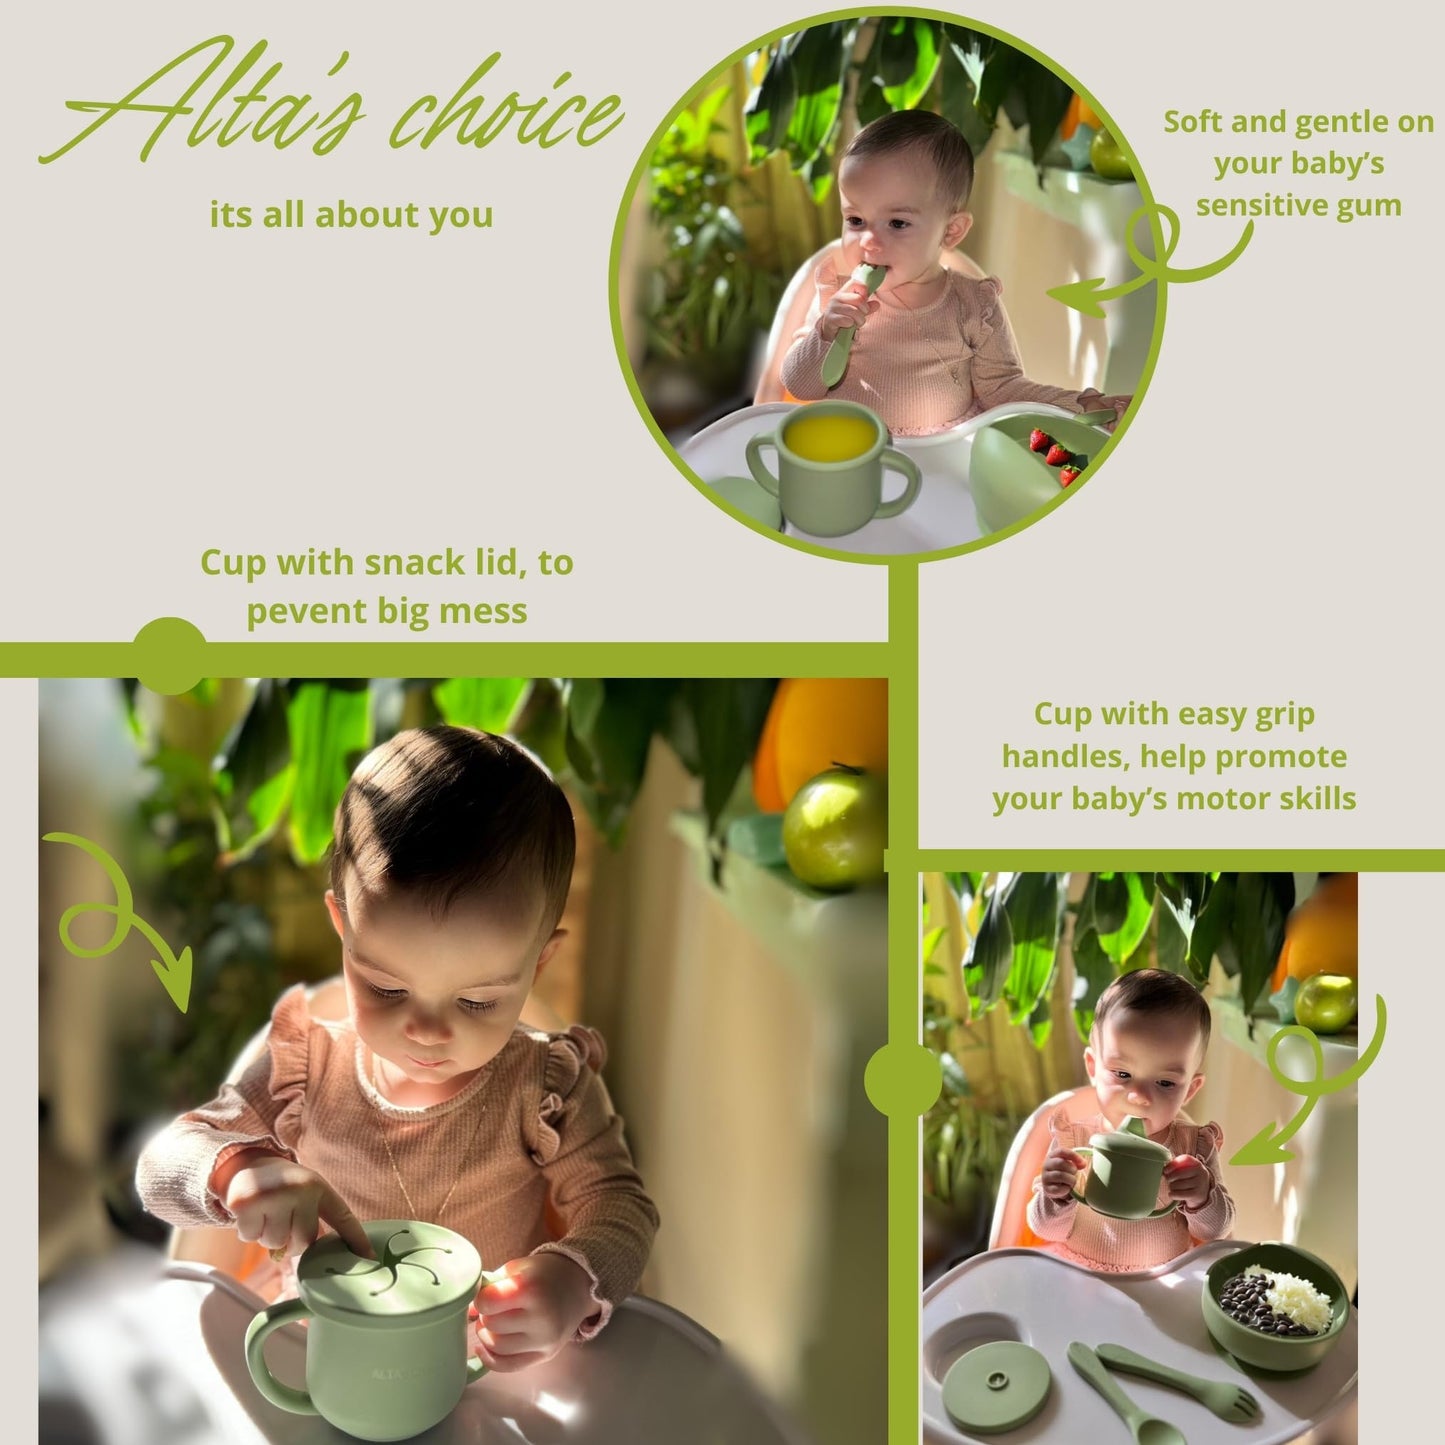 ALTA'S CHOICE Silicone Baby/Toddler Feeding Set. Baby essentials. BPA free baby led weaning feeding supplies. Suction bowl, spoon, fork, sippy cup, snack and straw lid. For kids 6+ months. (GREEN)